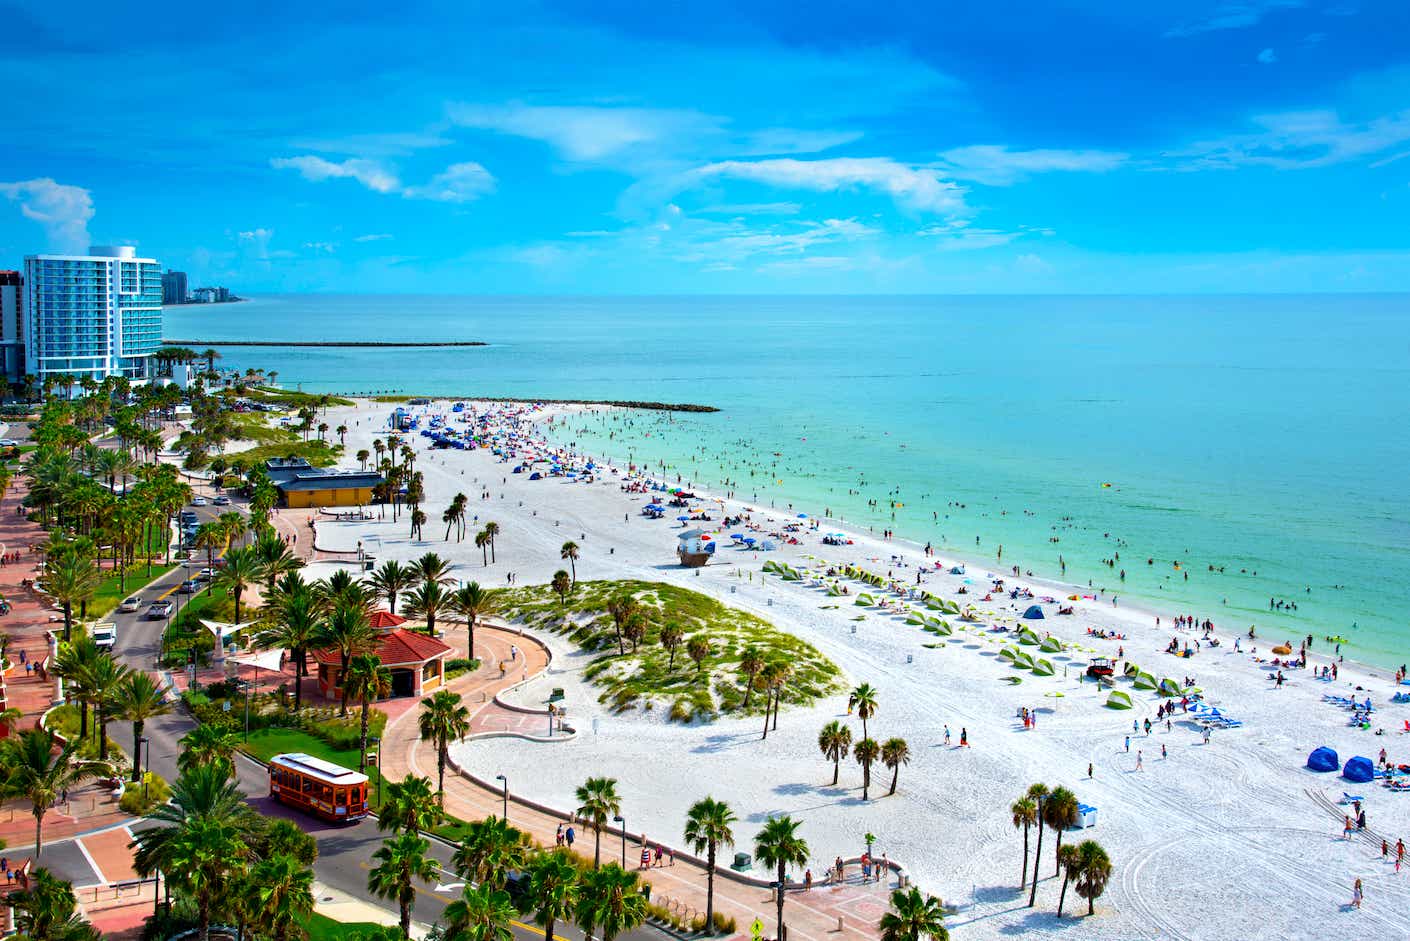 Sunny Clearwater beach with white sand, blue water, and a bustling downtown scene including high rises and palm trees.